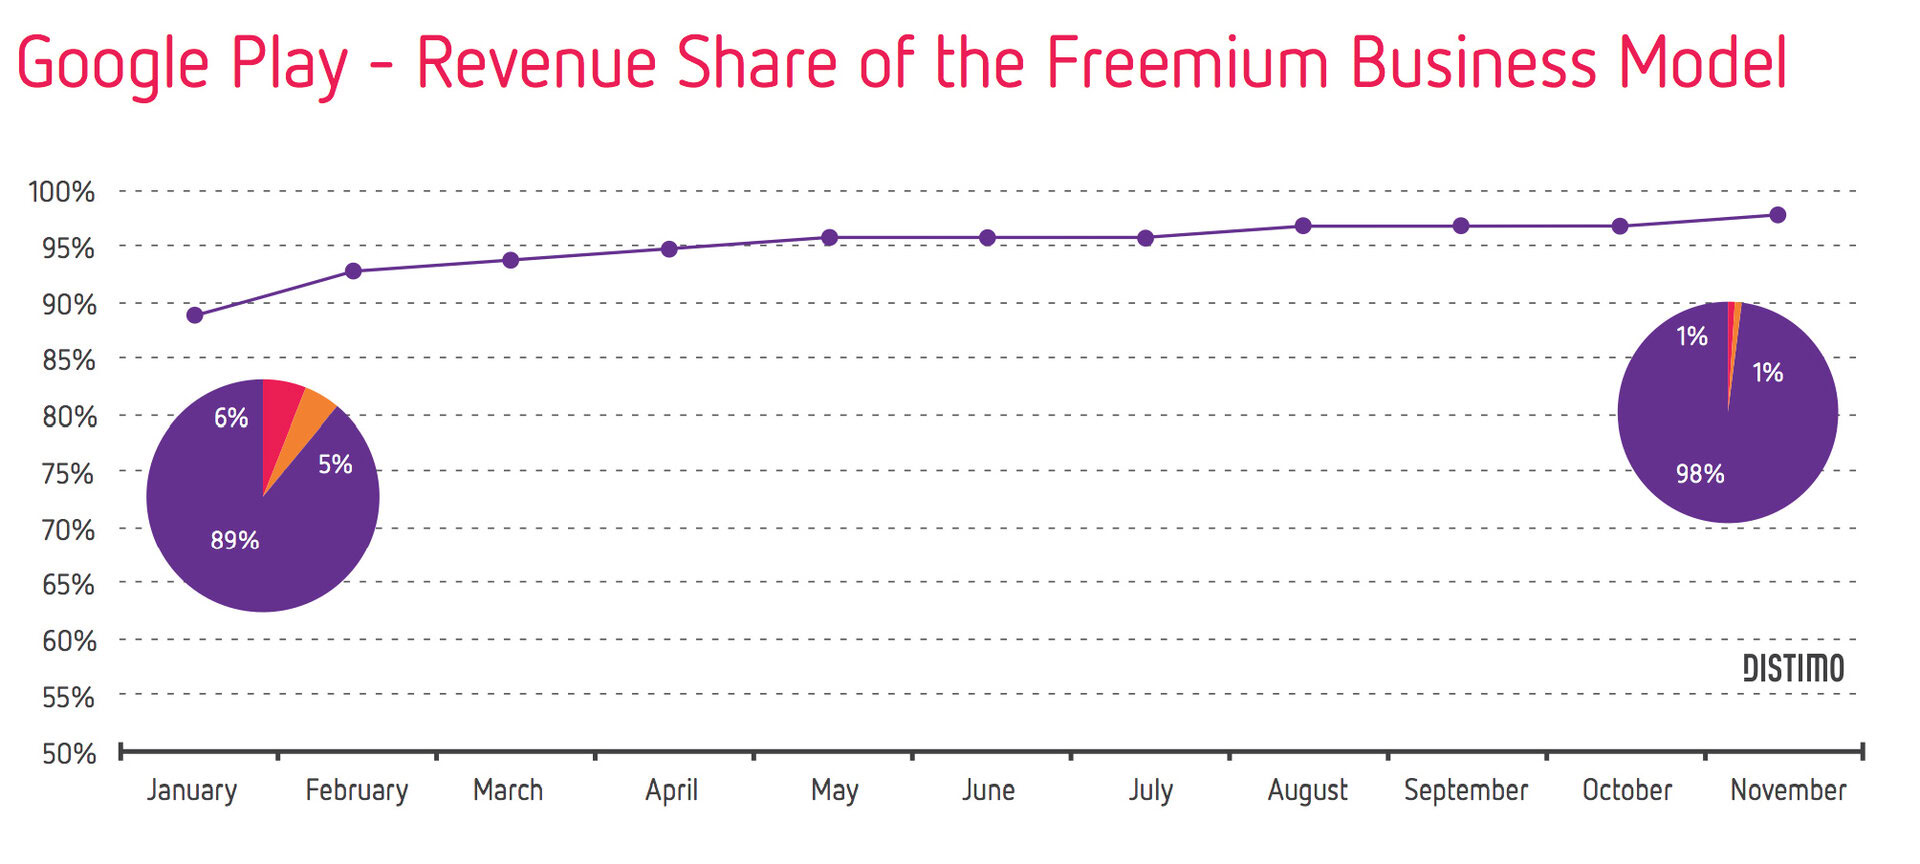 Google Play Share of Revenue Business Modell Free vs paid 2013